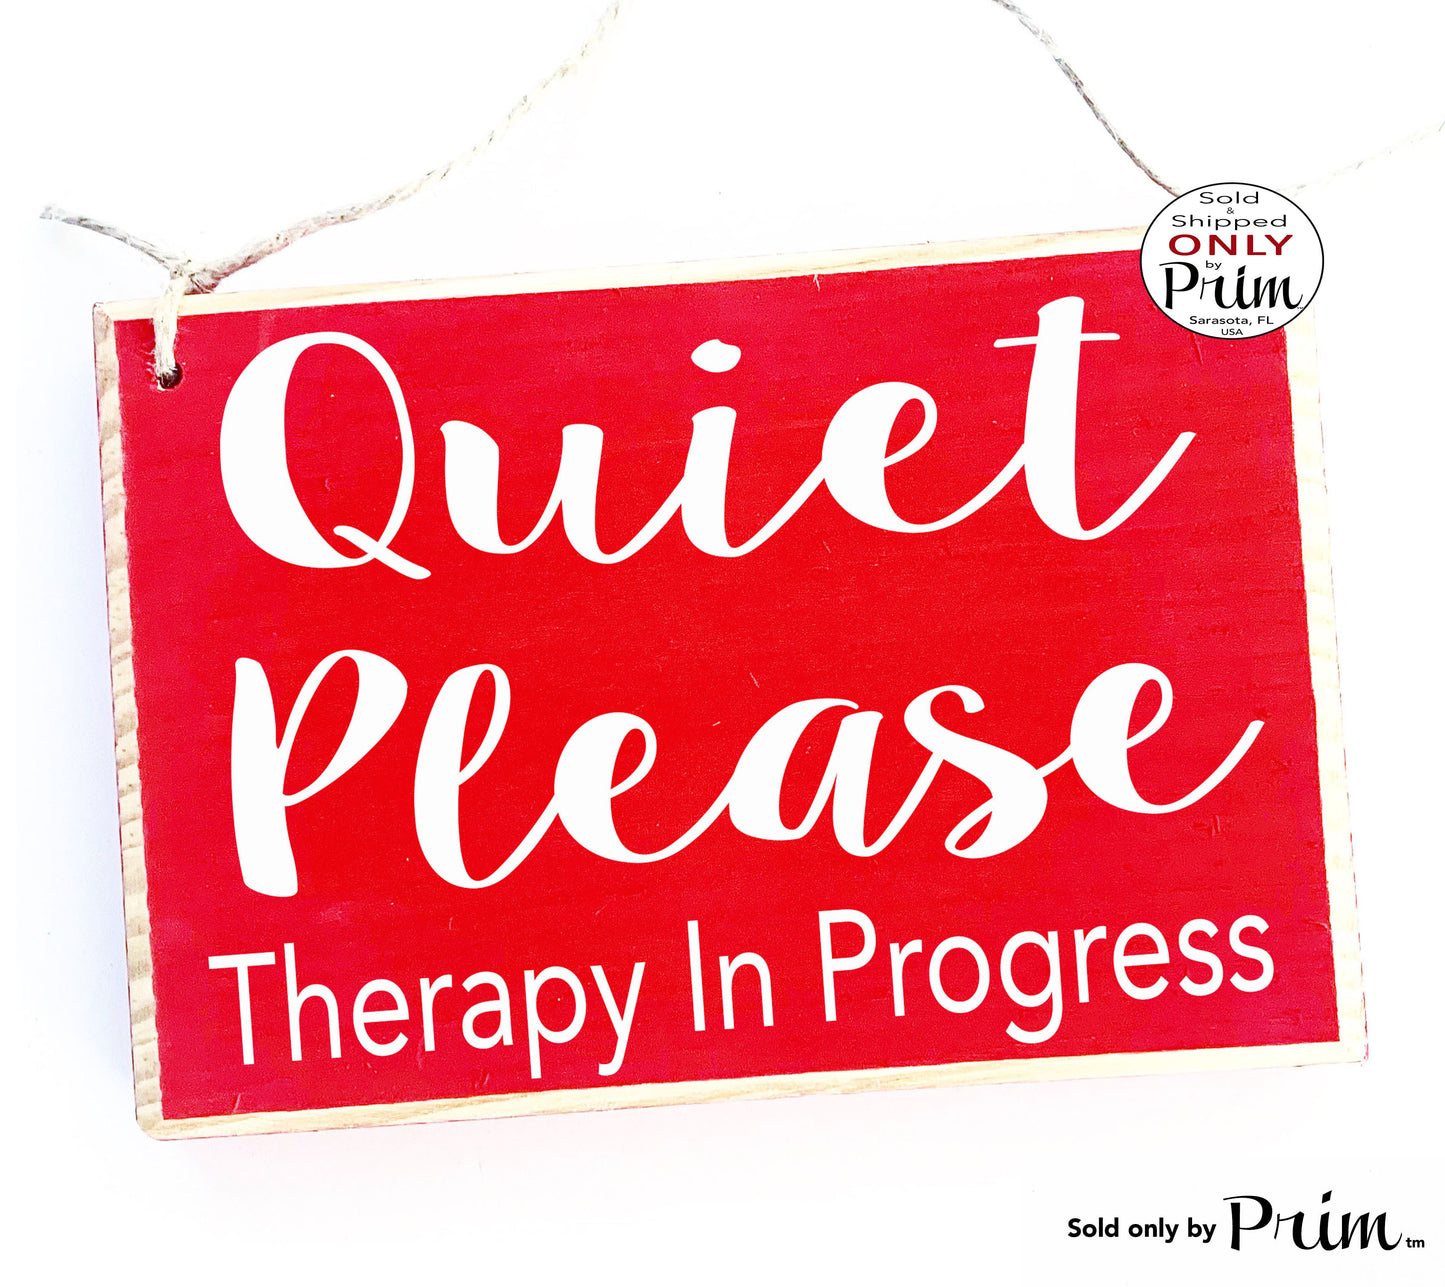 Quiet Please Therapy In Progress 8x6 Custom Wood Sign Spa In Progress Please Do Not Disturb Shhh Relaxation Soft Voices Therapy Plaque Designs by Prim